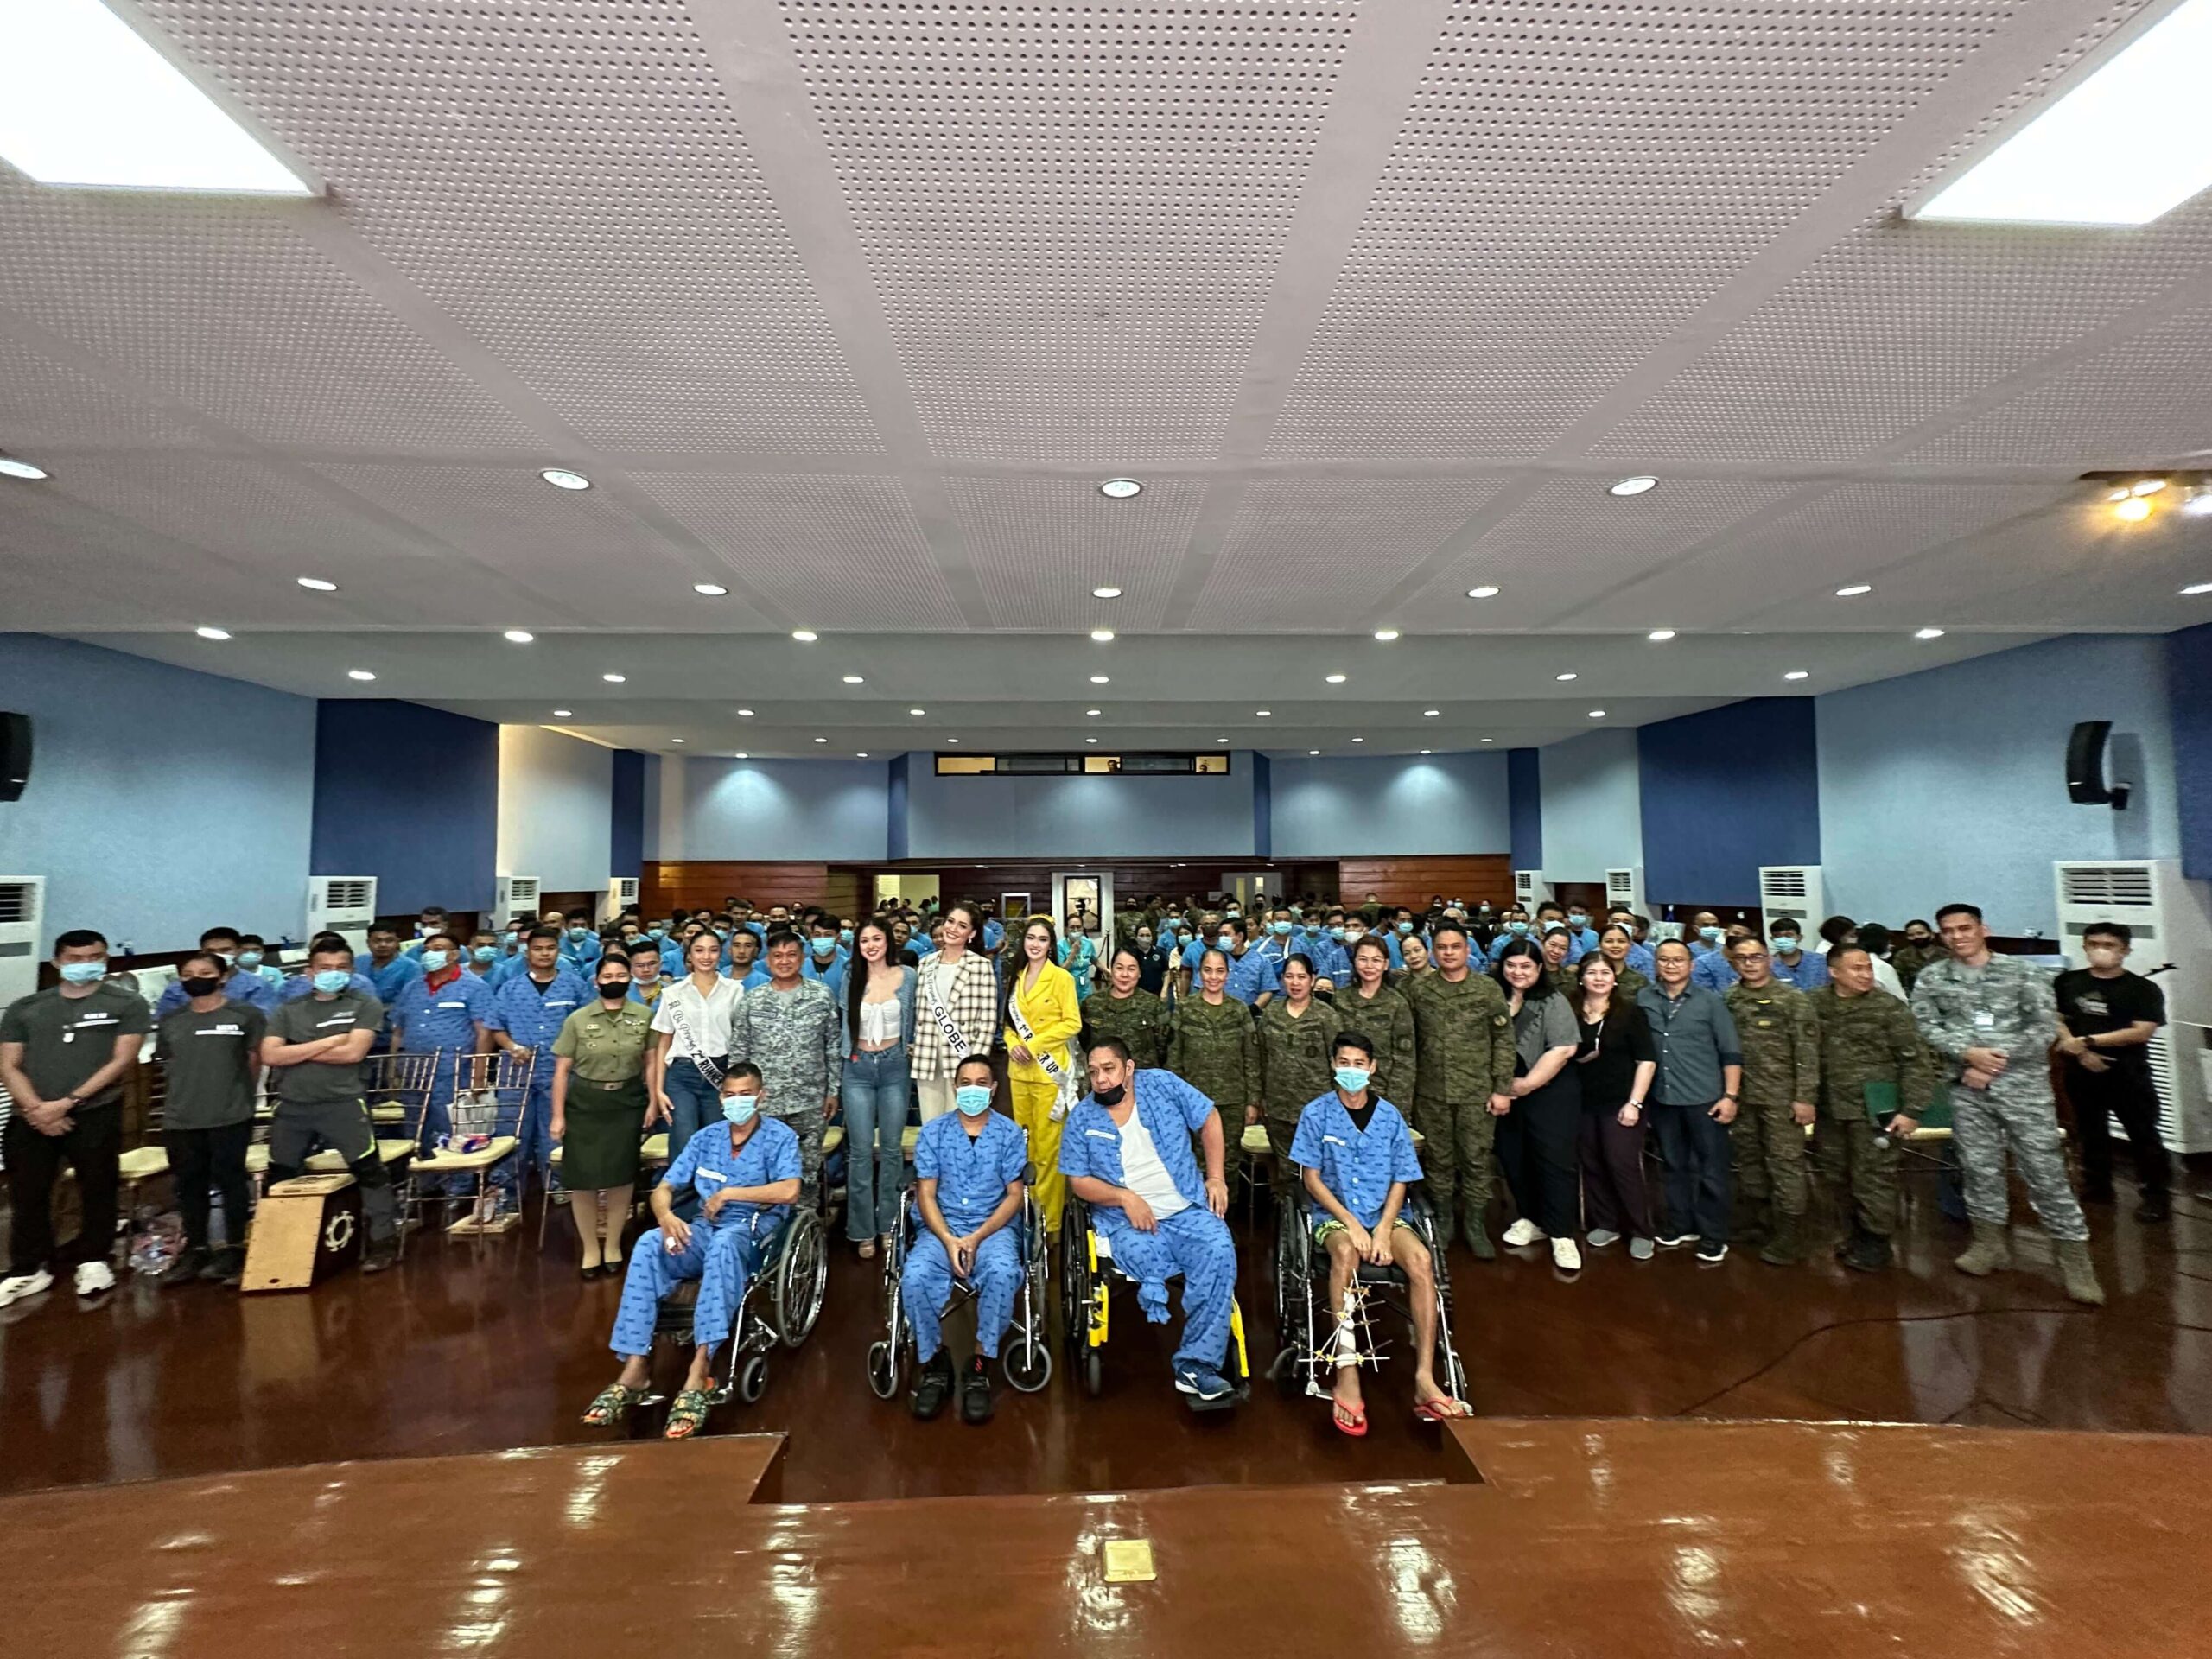 BPCI shows support to PH soldiers through hospital visit